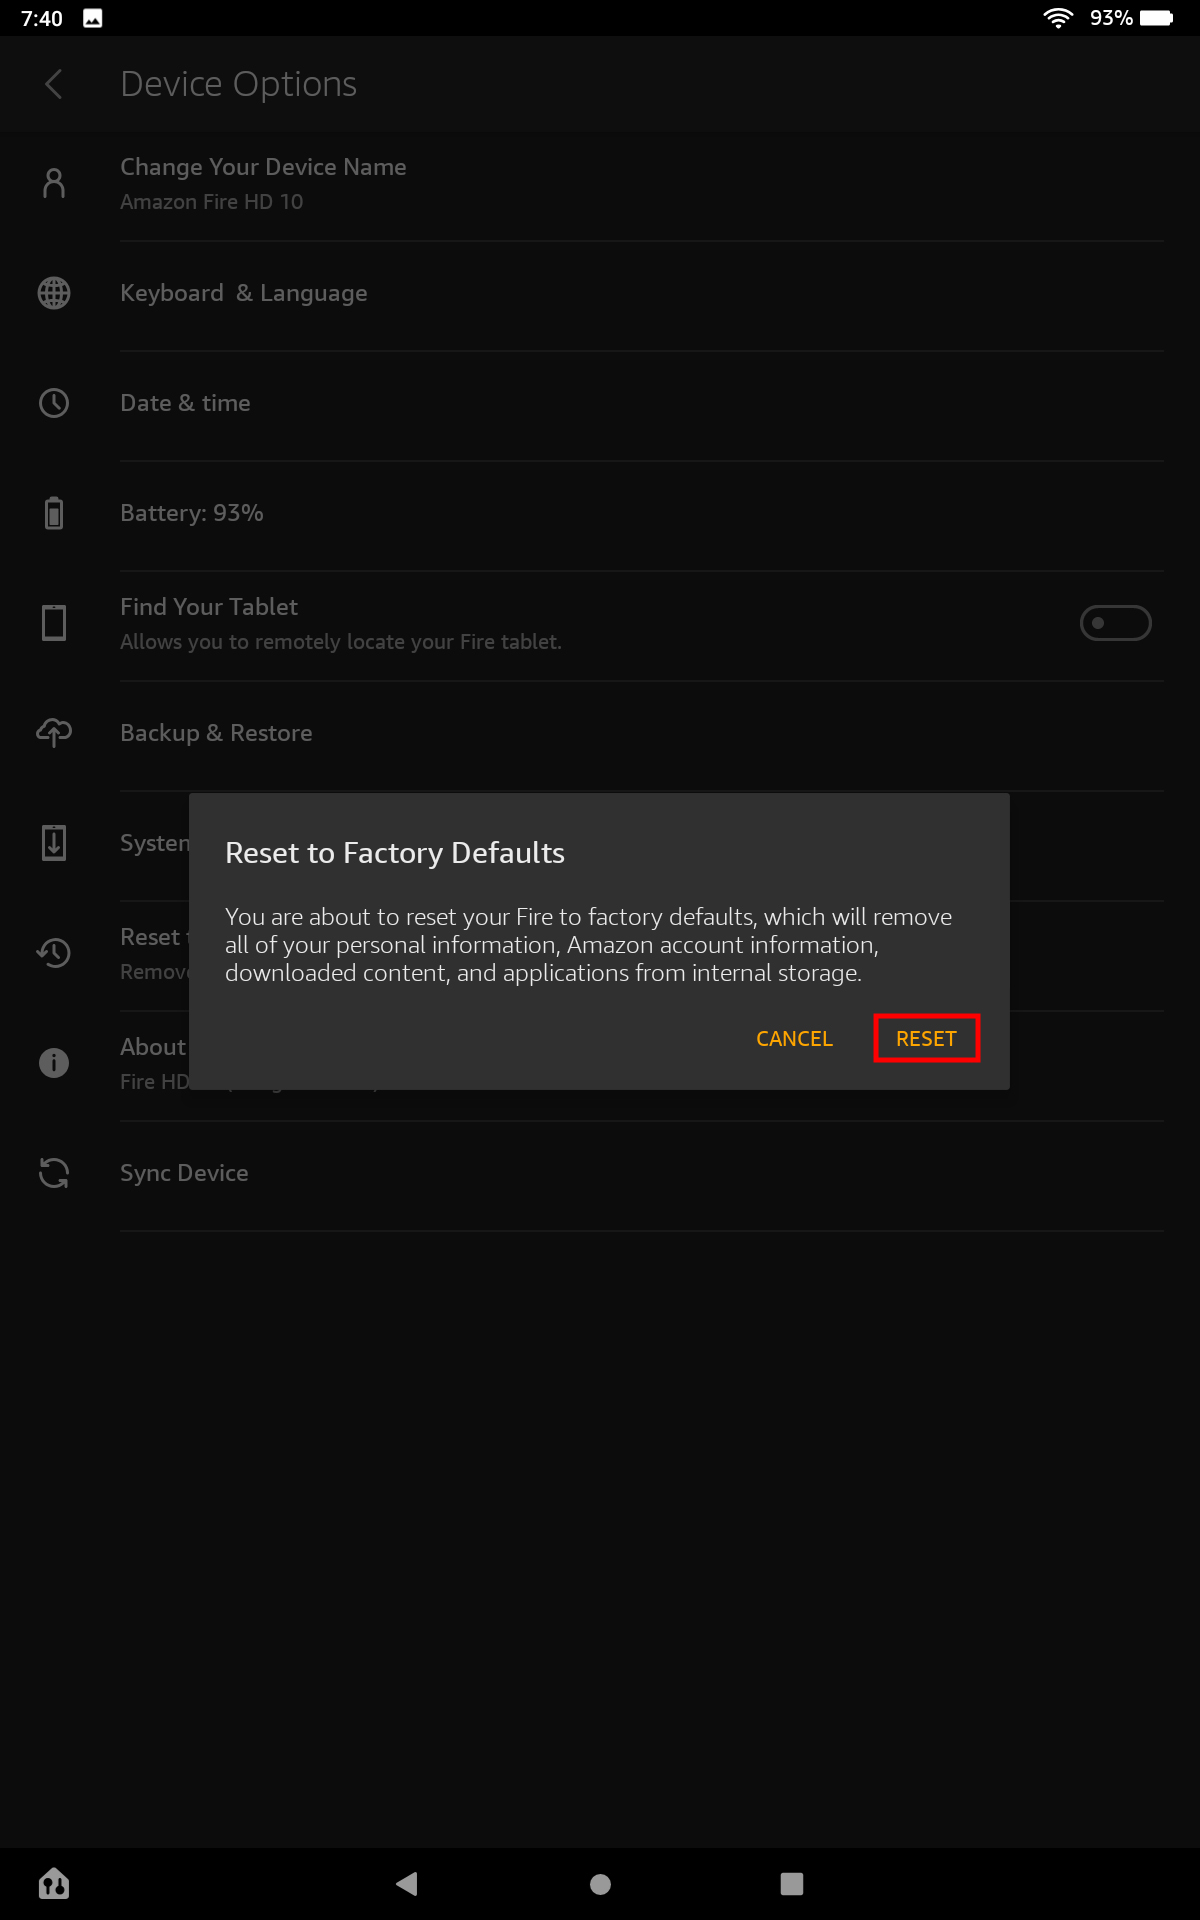 How to factory reset your Amazon Fire tablet from the settings 4